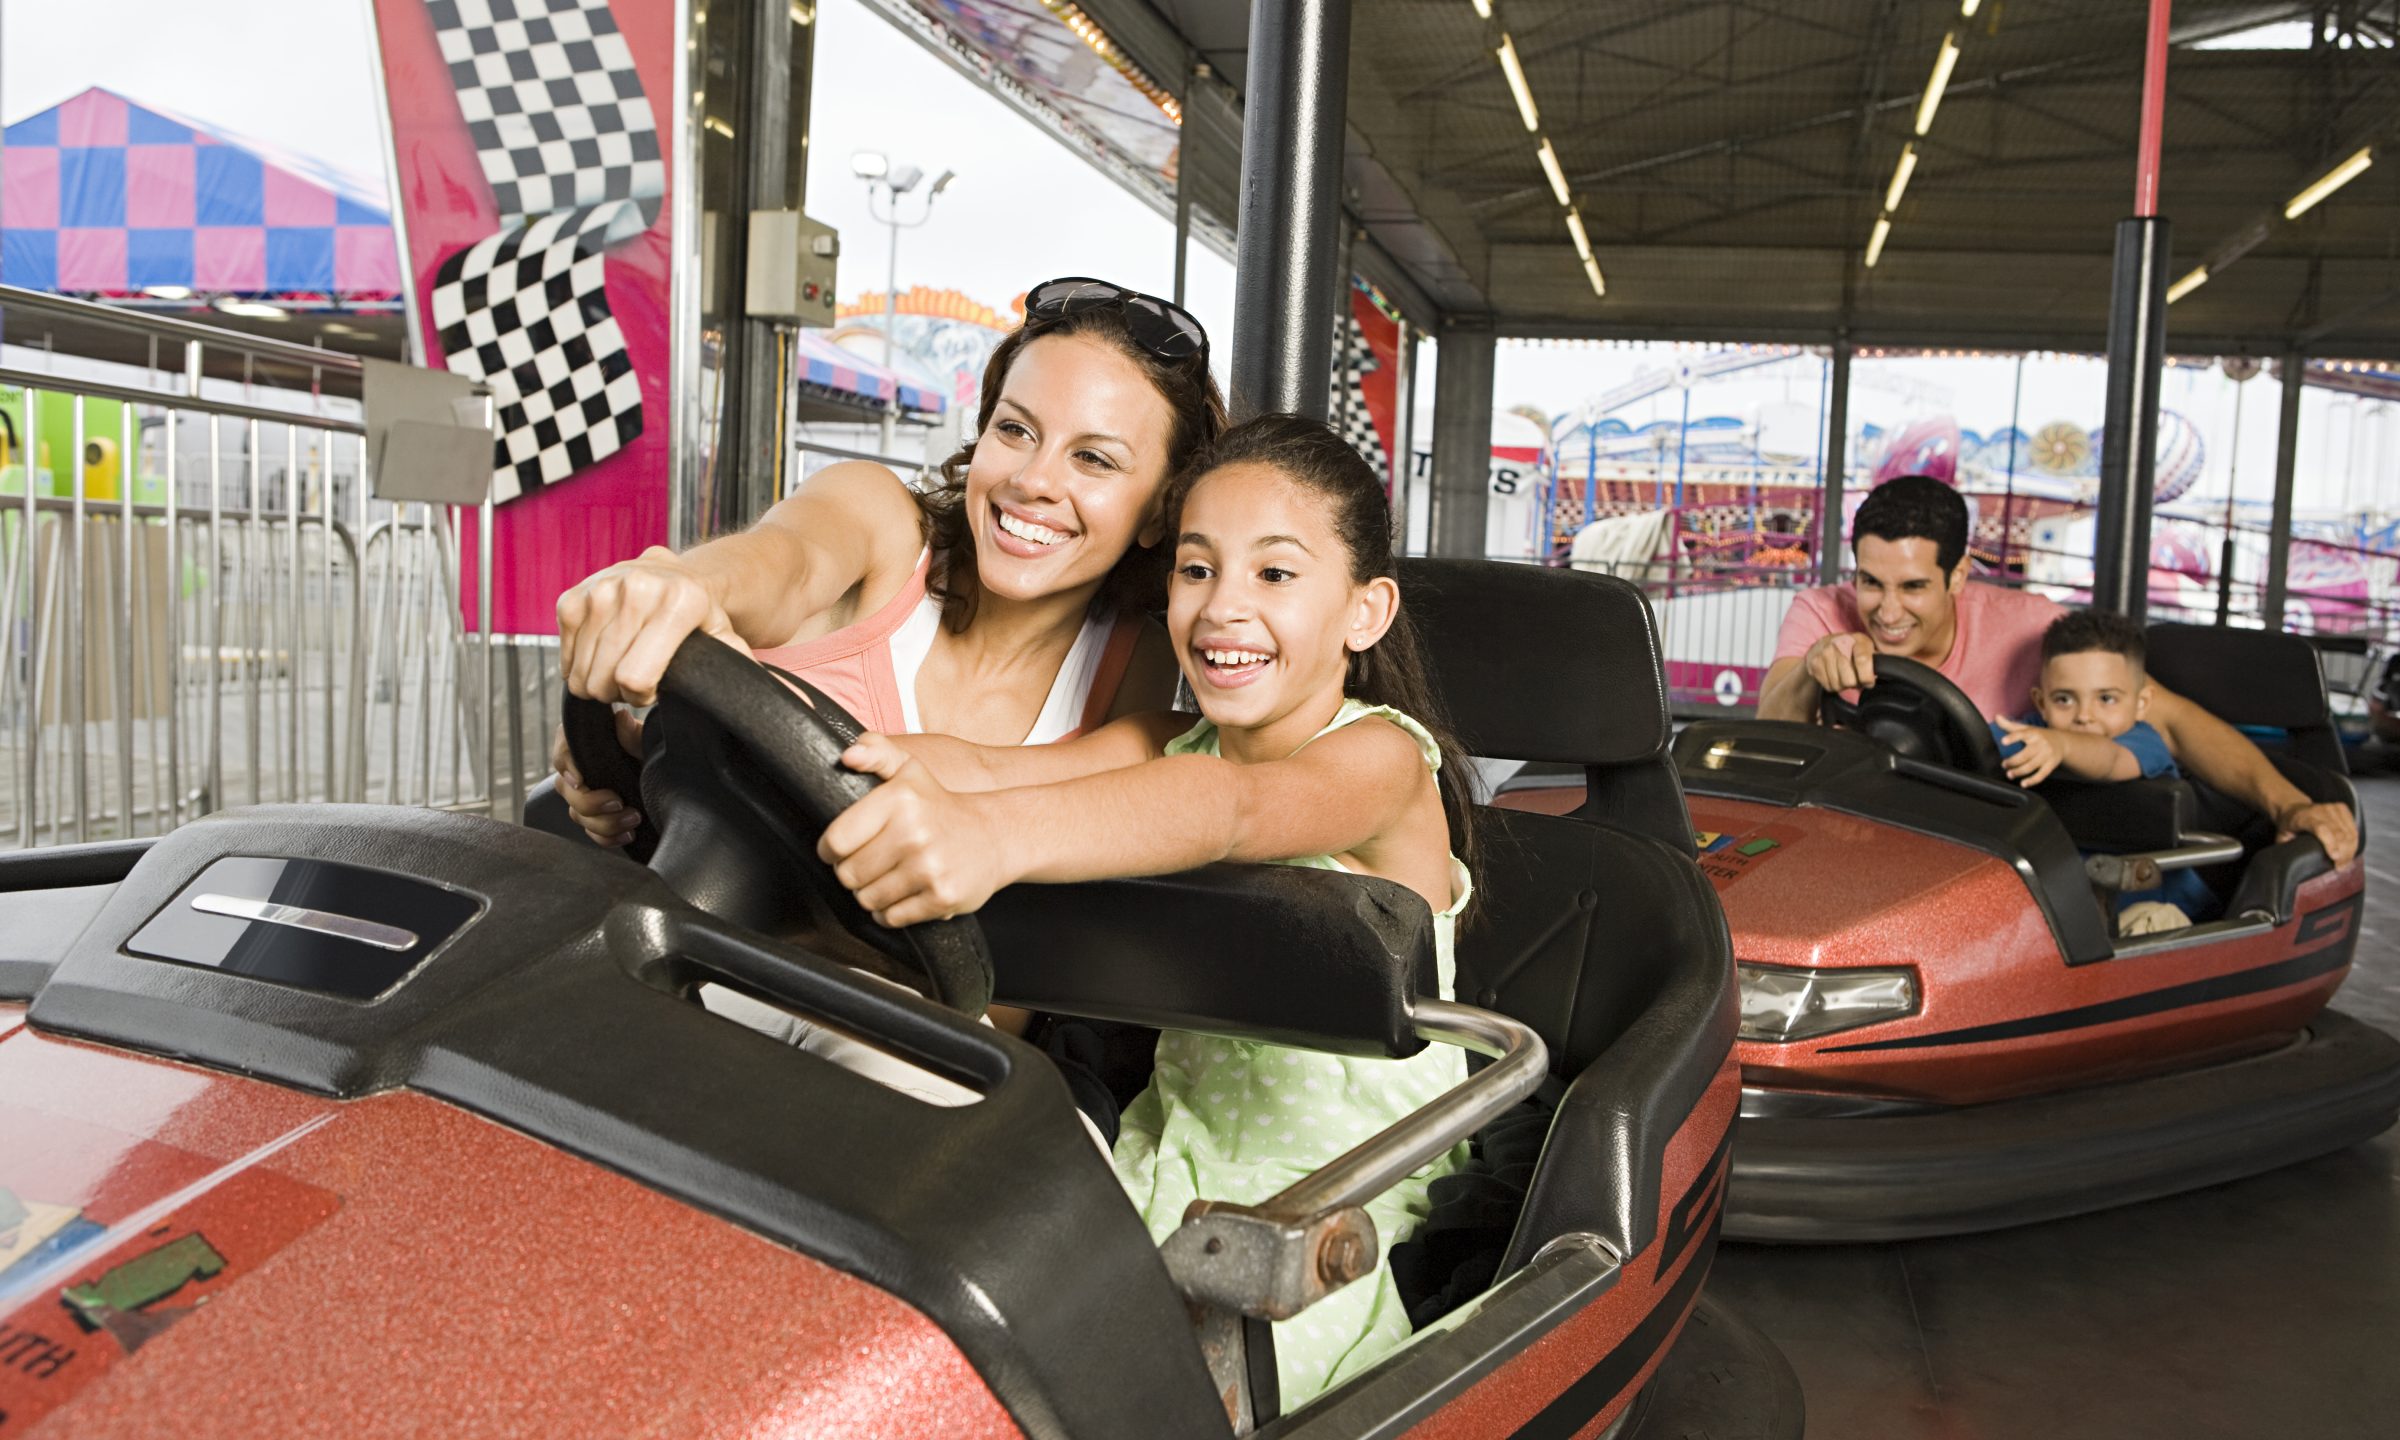 12 Florida Day Trips: Amusement and Theme Parks